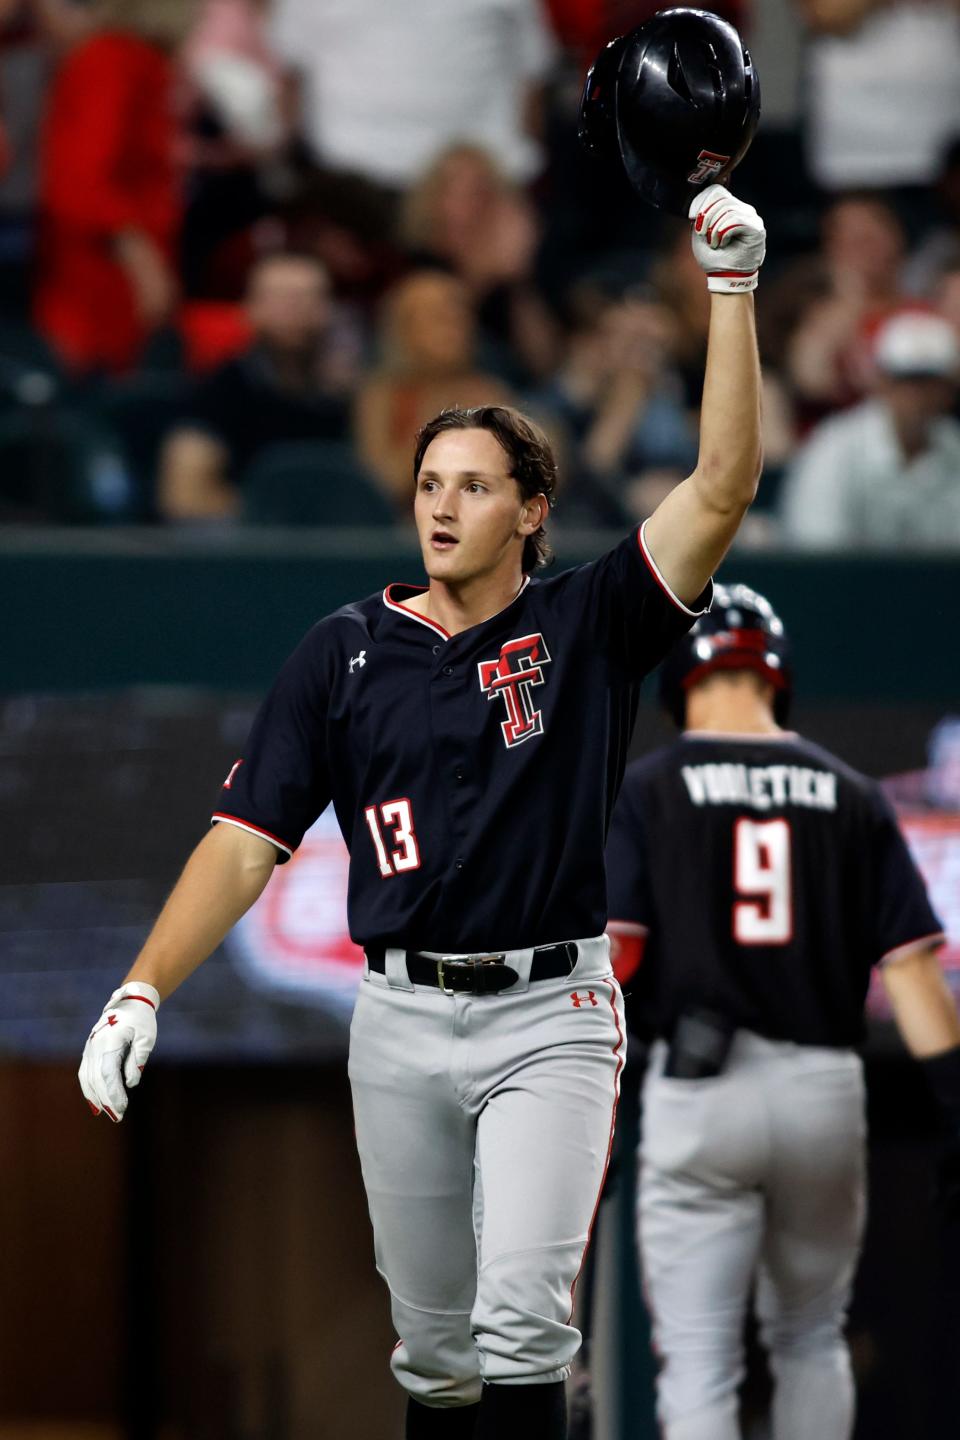 Texas Tech’s Gavin Kash (13) provides a hat tip to the crowd after hitting his 24th home run of the season during a first-round game against West Virginia in the Big 12 Conference Tournament on Wednesday, May 24, 2023, at Globe Life Field in Arlington, Texas.